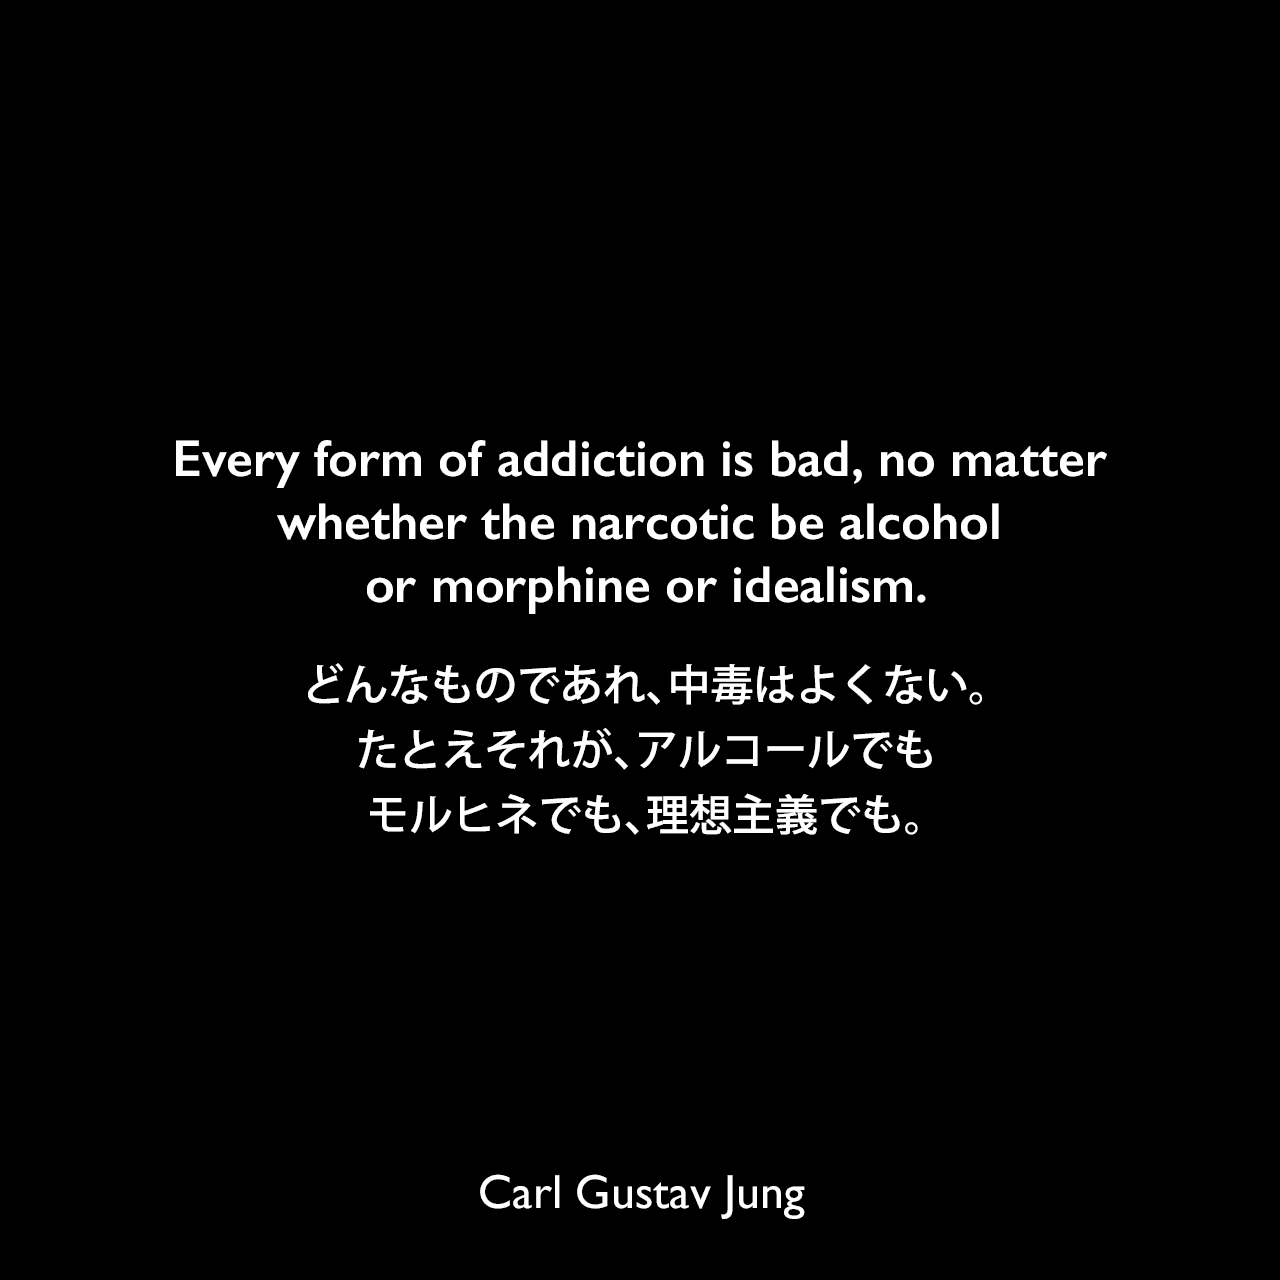 Every form of addiction is bad, no matter whether the narcotic be alcohol or morphine or idealism.どんなものであれ、中毒はよくない。たとえそれが、アルコールでも、モルヒネでも、理想主義でも。Carl Gustav Jung